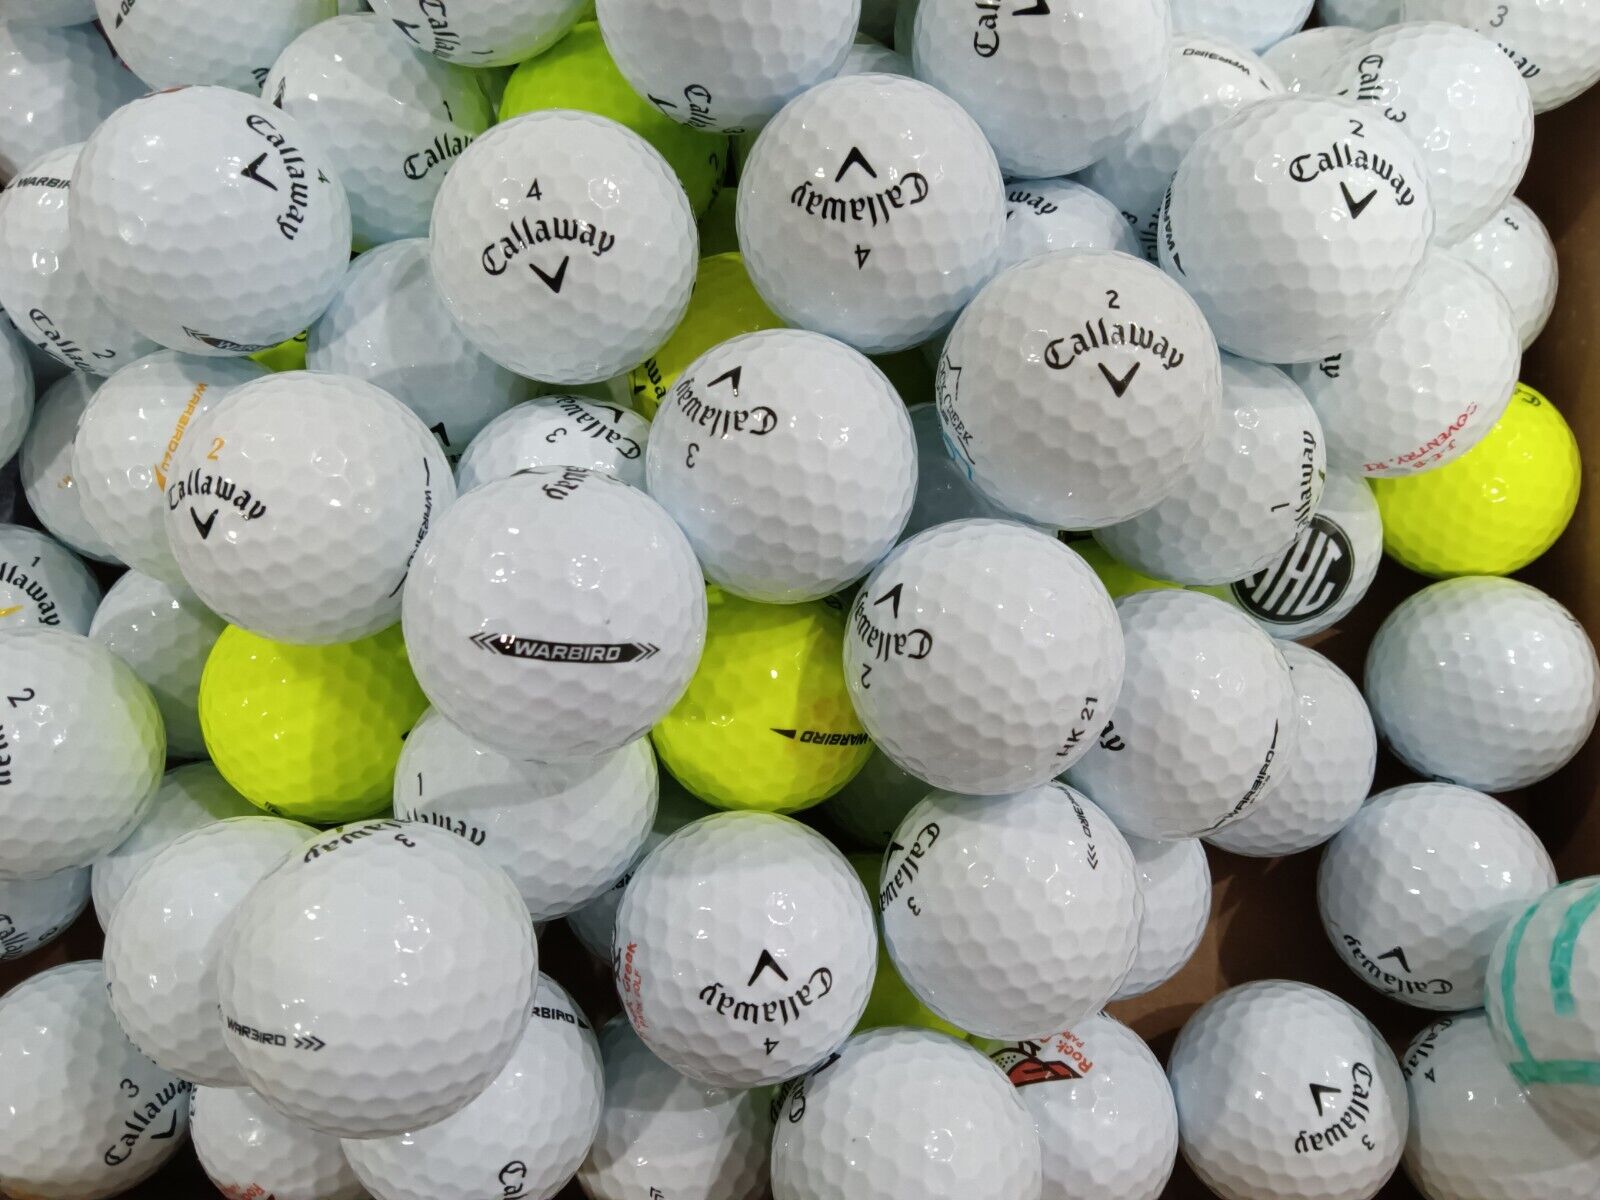 50 Used Callaway Warbird Balls in Excellent Condition 